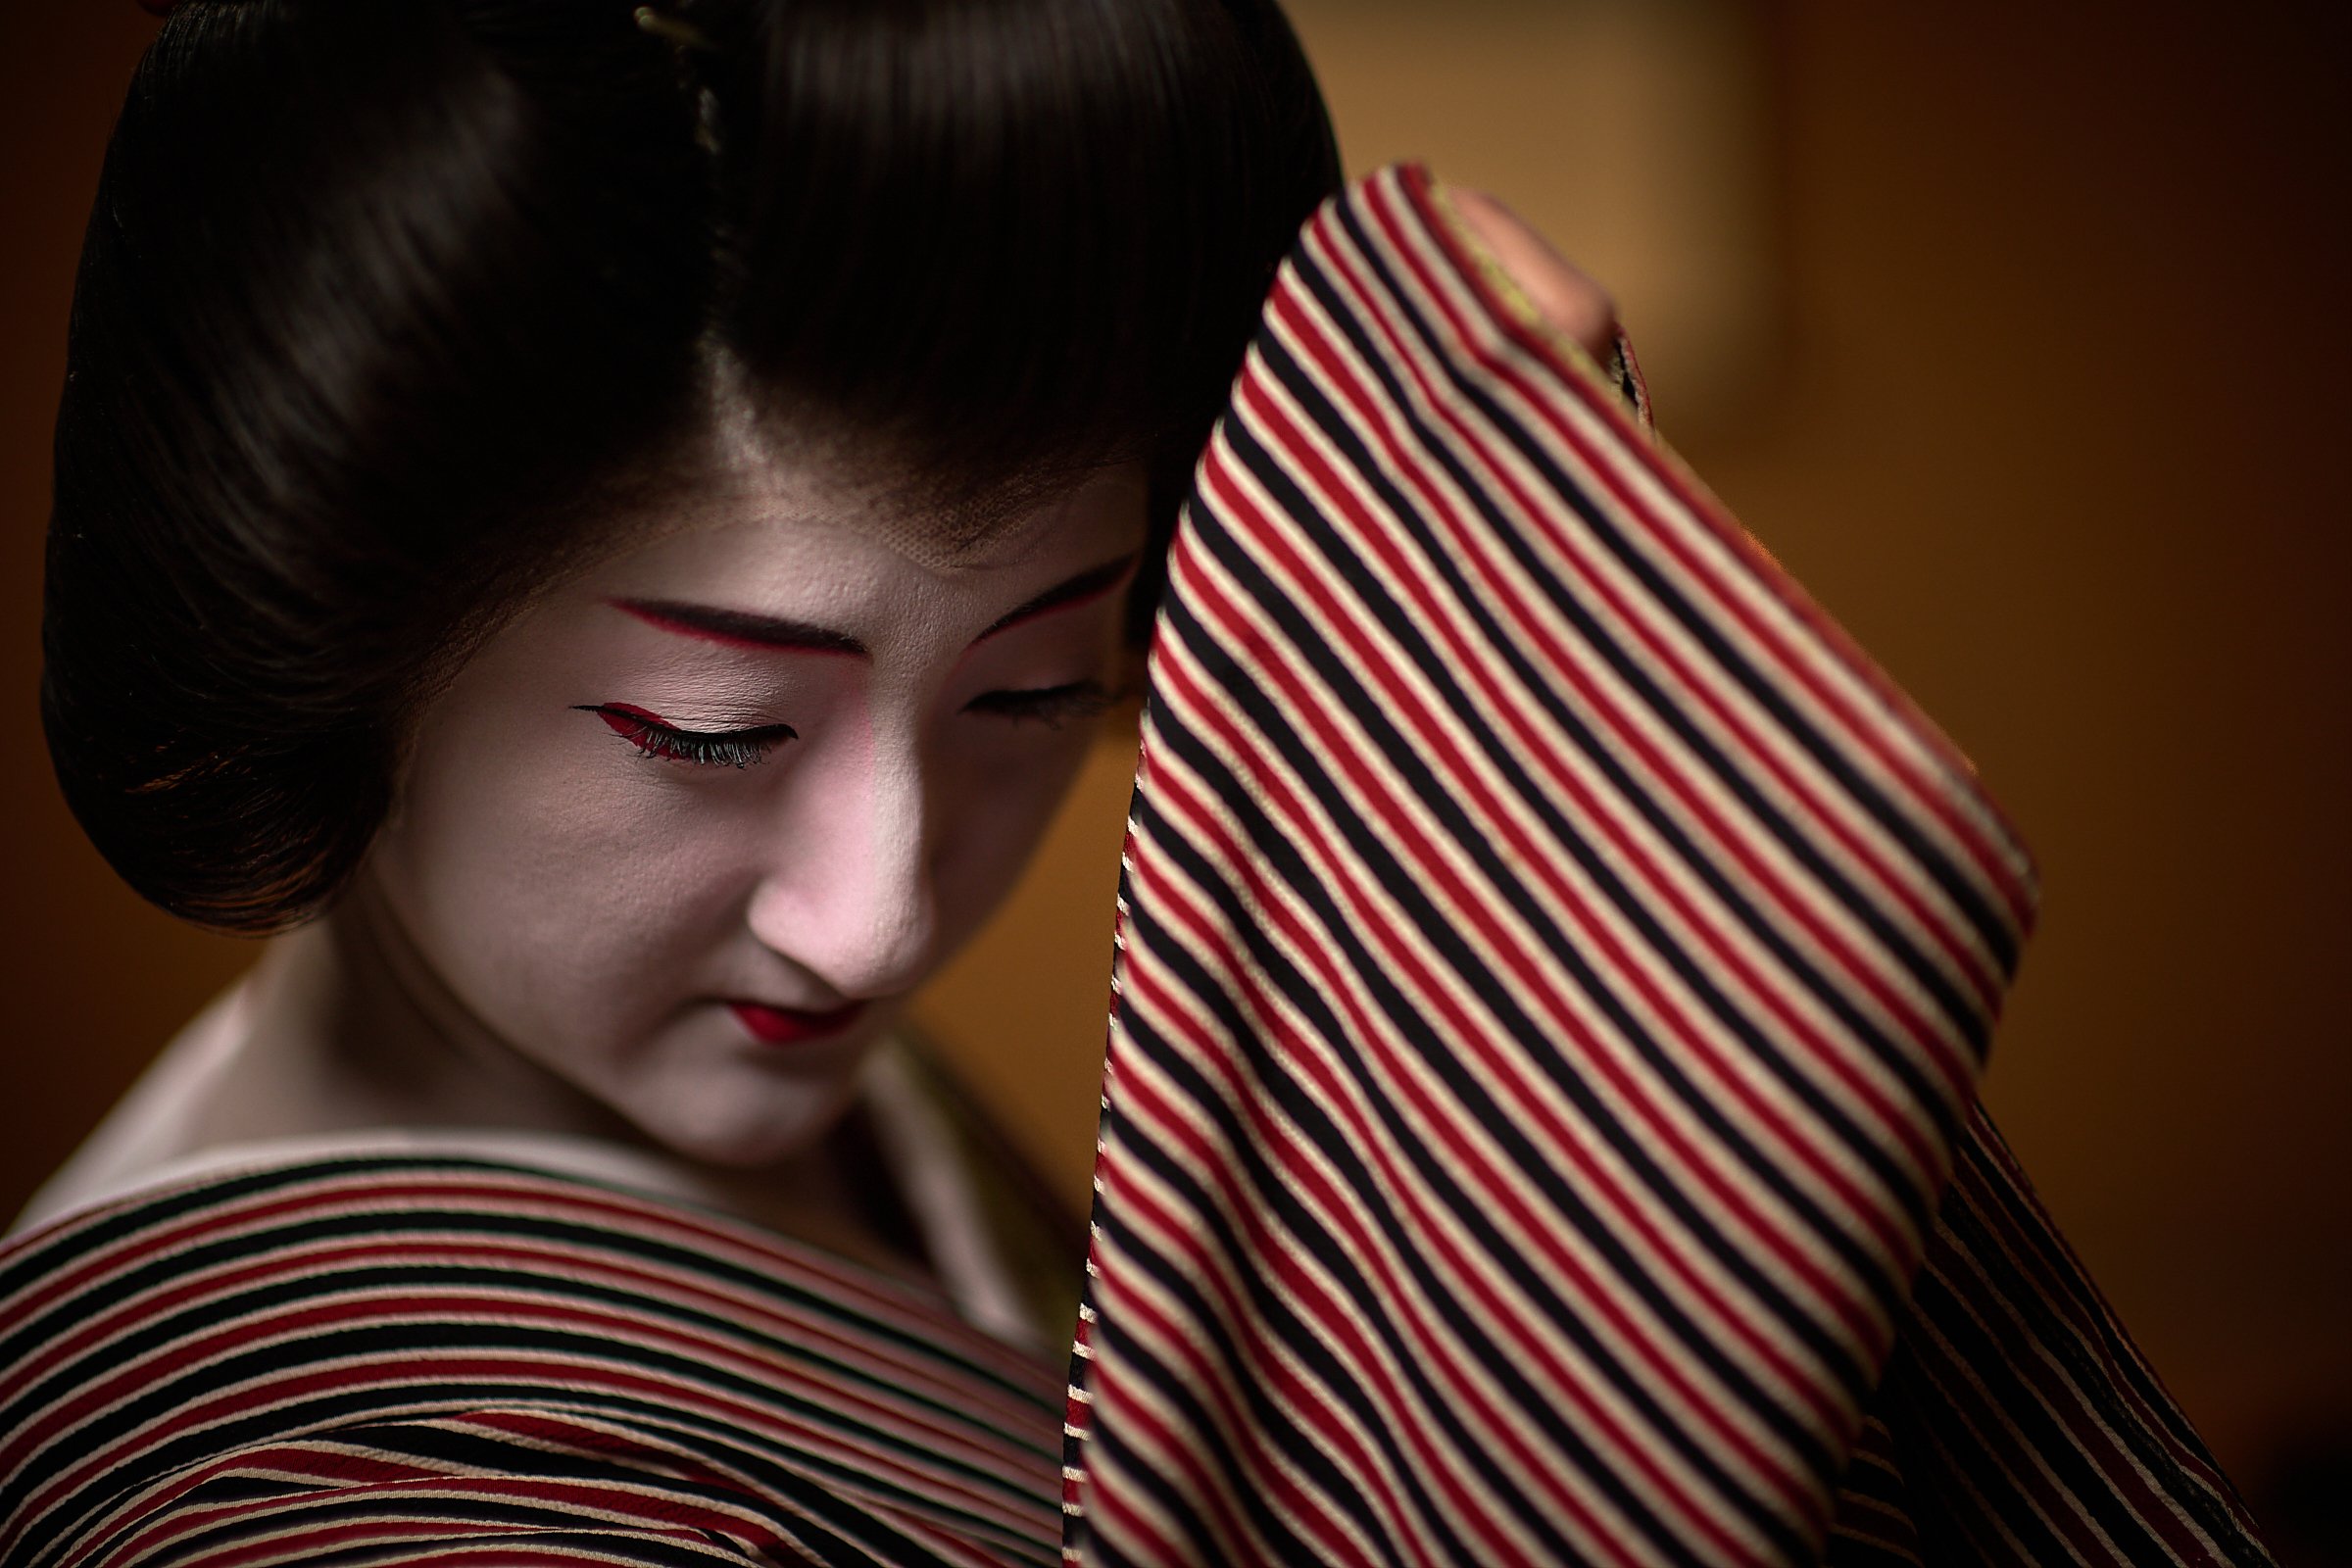 Masaki performing a complex move, involving a special way of holding the kimono sleeve